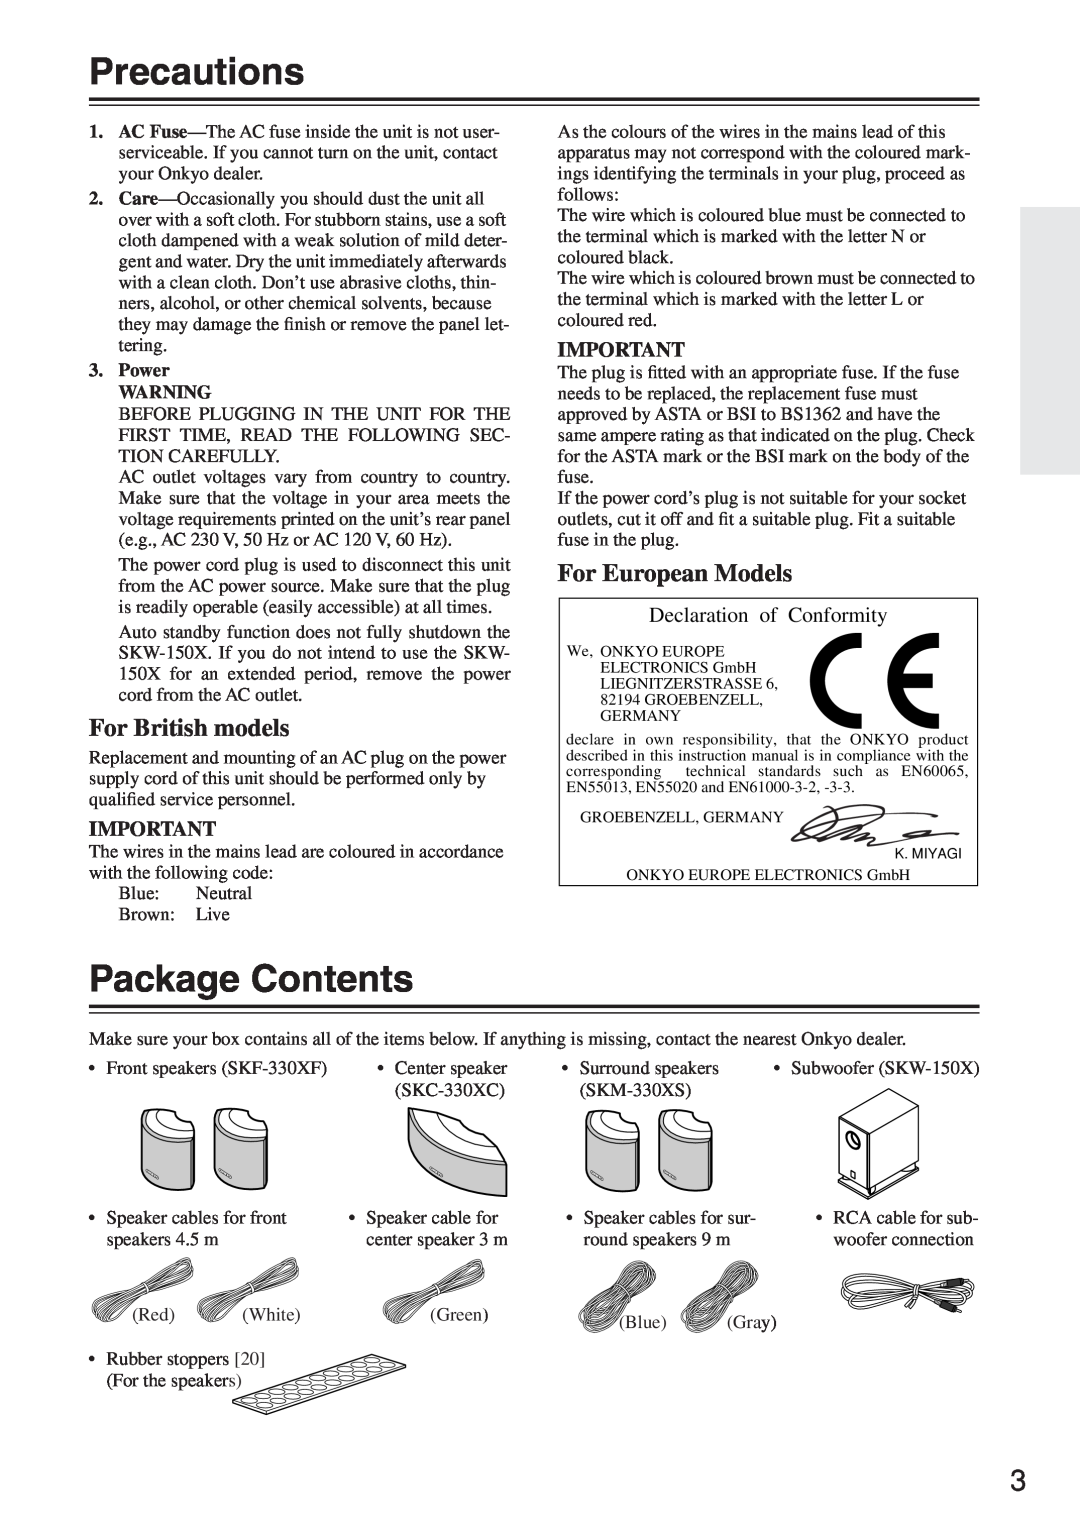 Onkyo SKC-330XC Precautions, Package Contents, For British models, For European Models, Declaration of Conformity, Power 